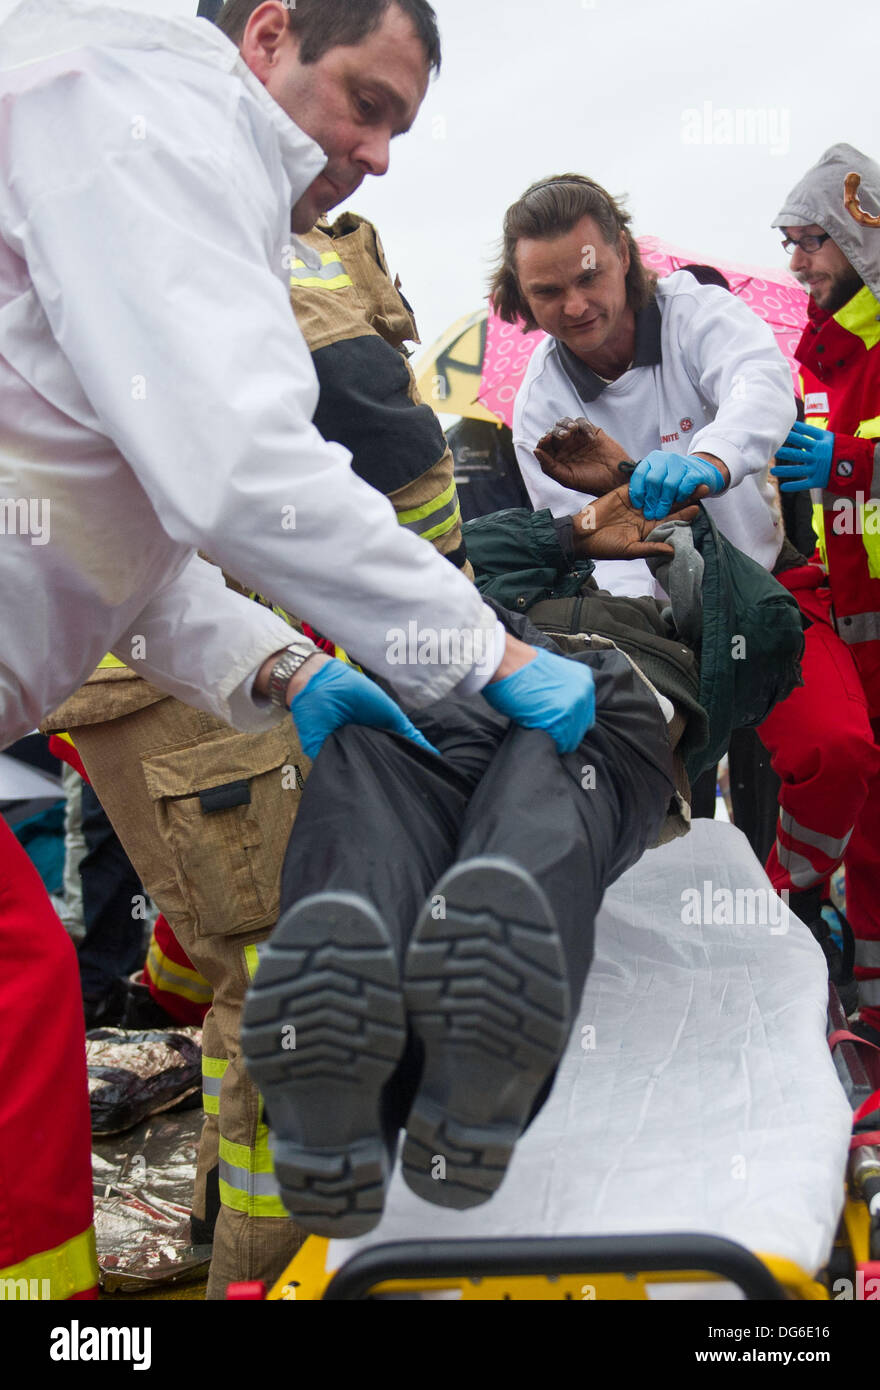 Berlin, Germany. 15th Oct, 2013. A refugee is put on a stretcher by rescue workers at square Pariser Platz in Berlin, Germany, 15 October 2013. Three refugees had to be taken to the hospital because of their poor state of health. The refugees have been on hunger strike since 09 October 2013. Photo: OLE SPATA/dpa/Alamy Live News Stock Photo